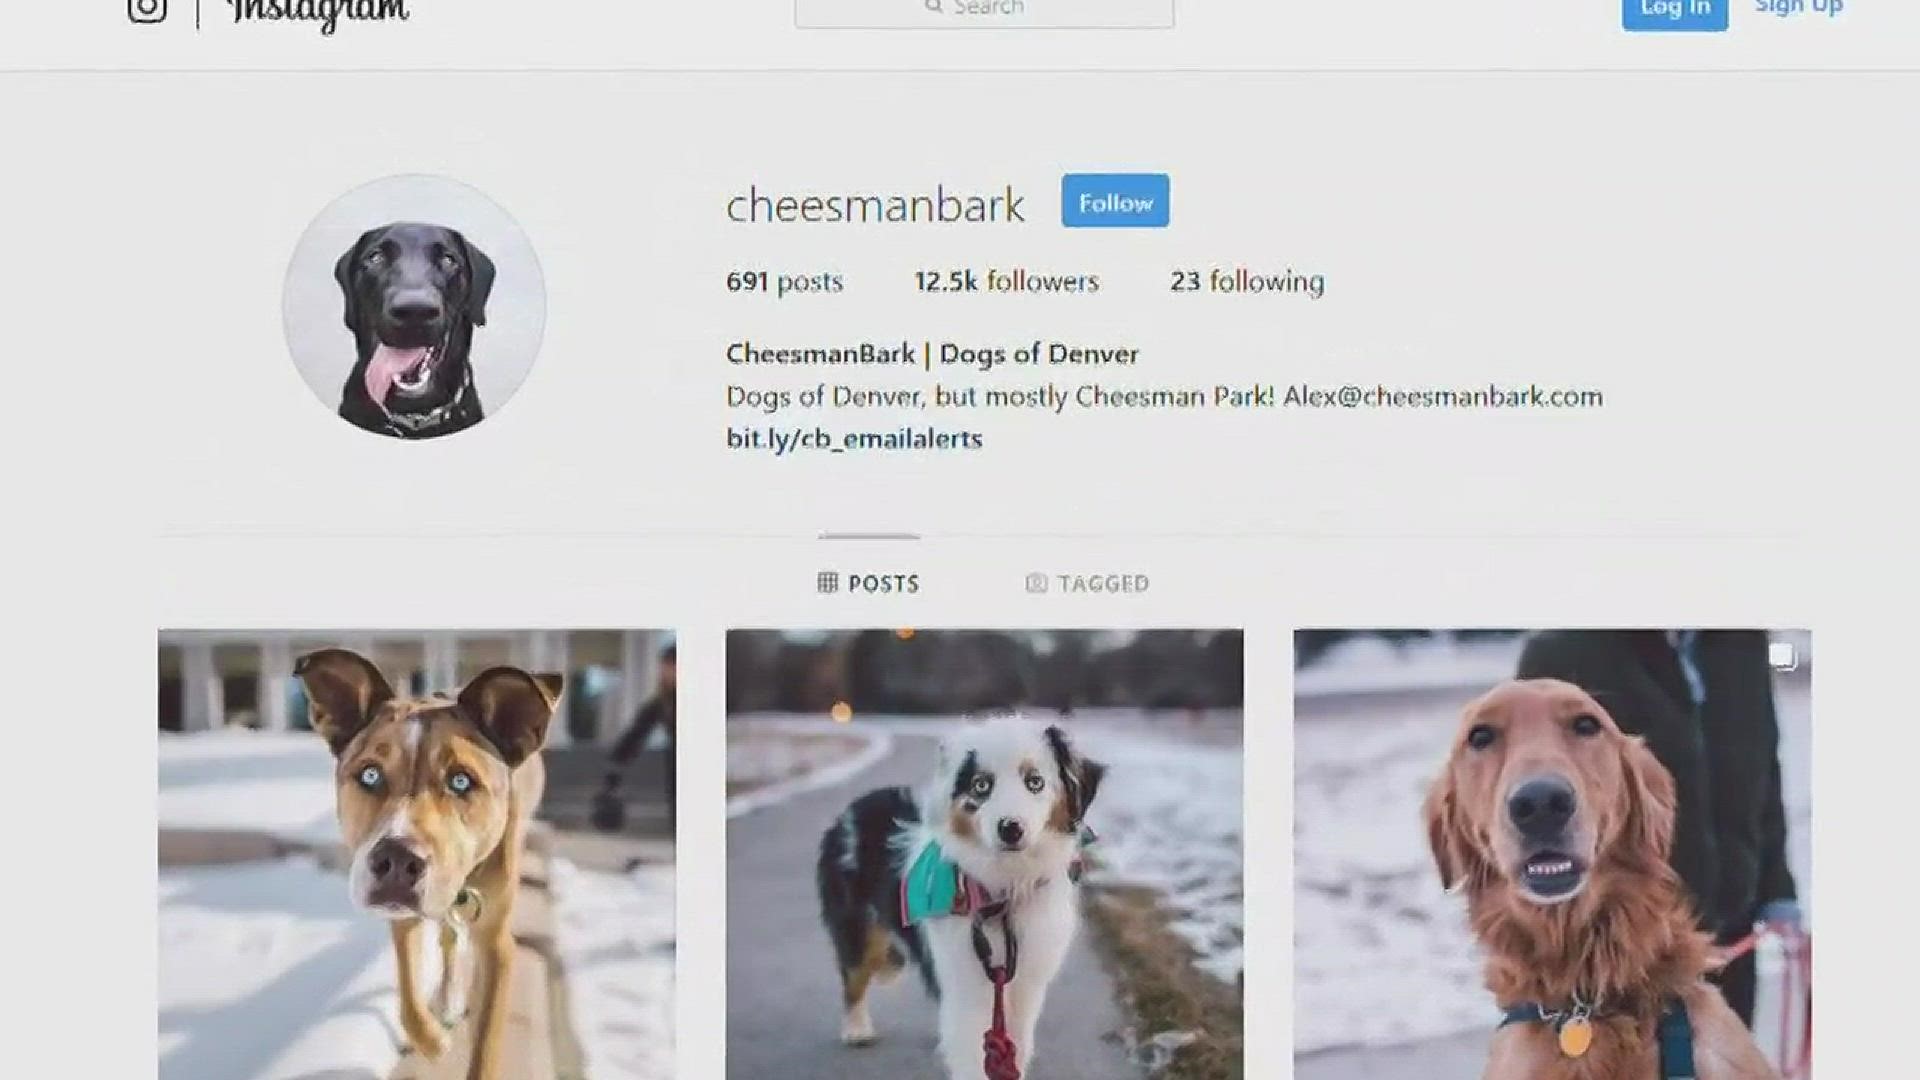 Cheesman Bark chronicles the dogs that visit Cheesman Park in Denver with their owners on Instagram.